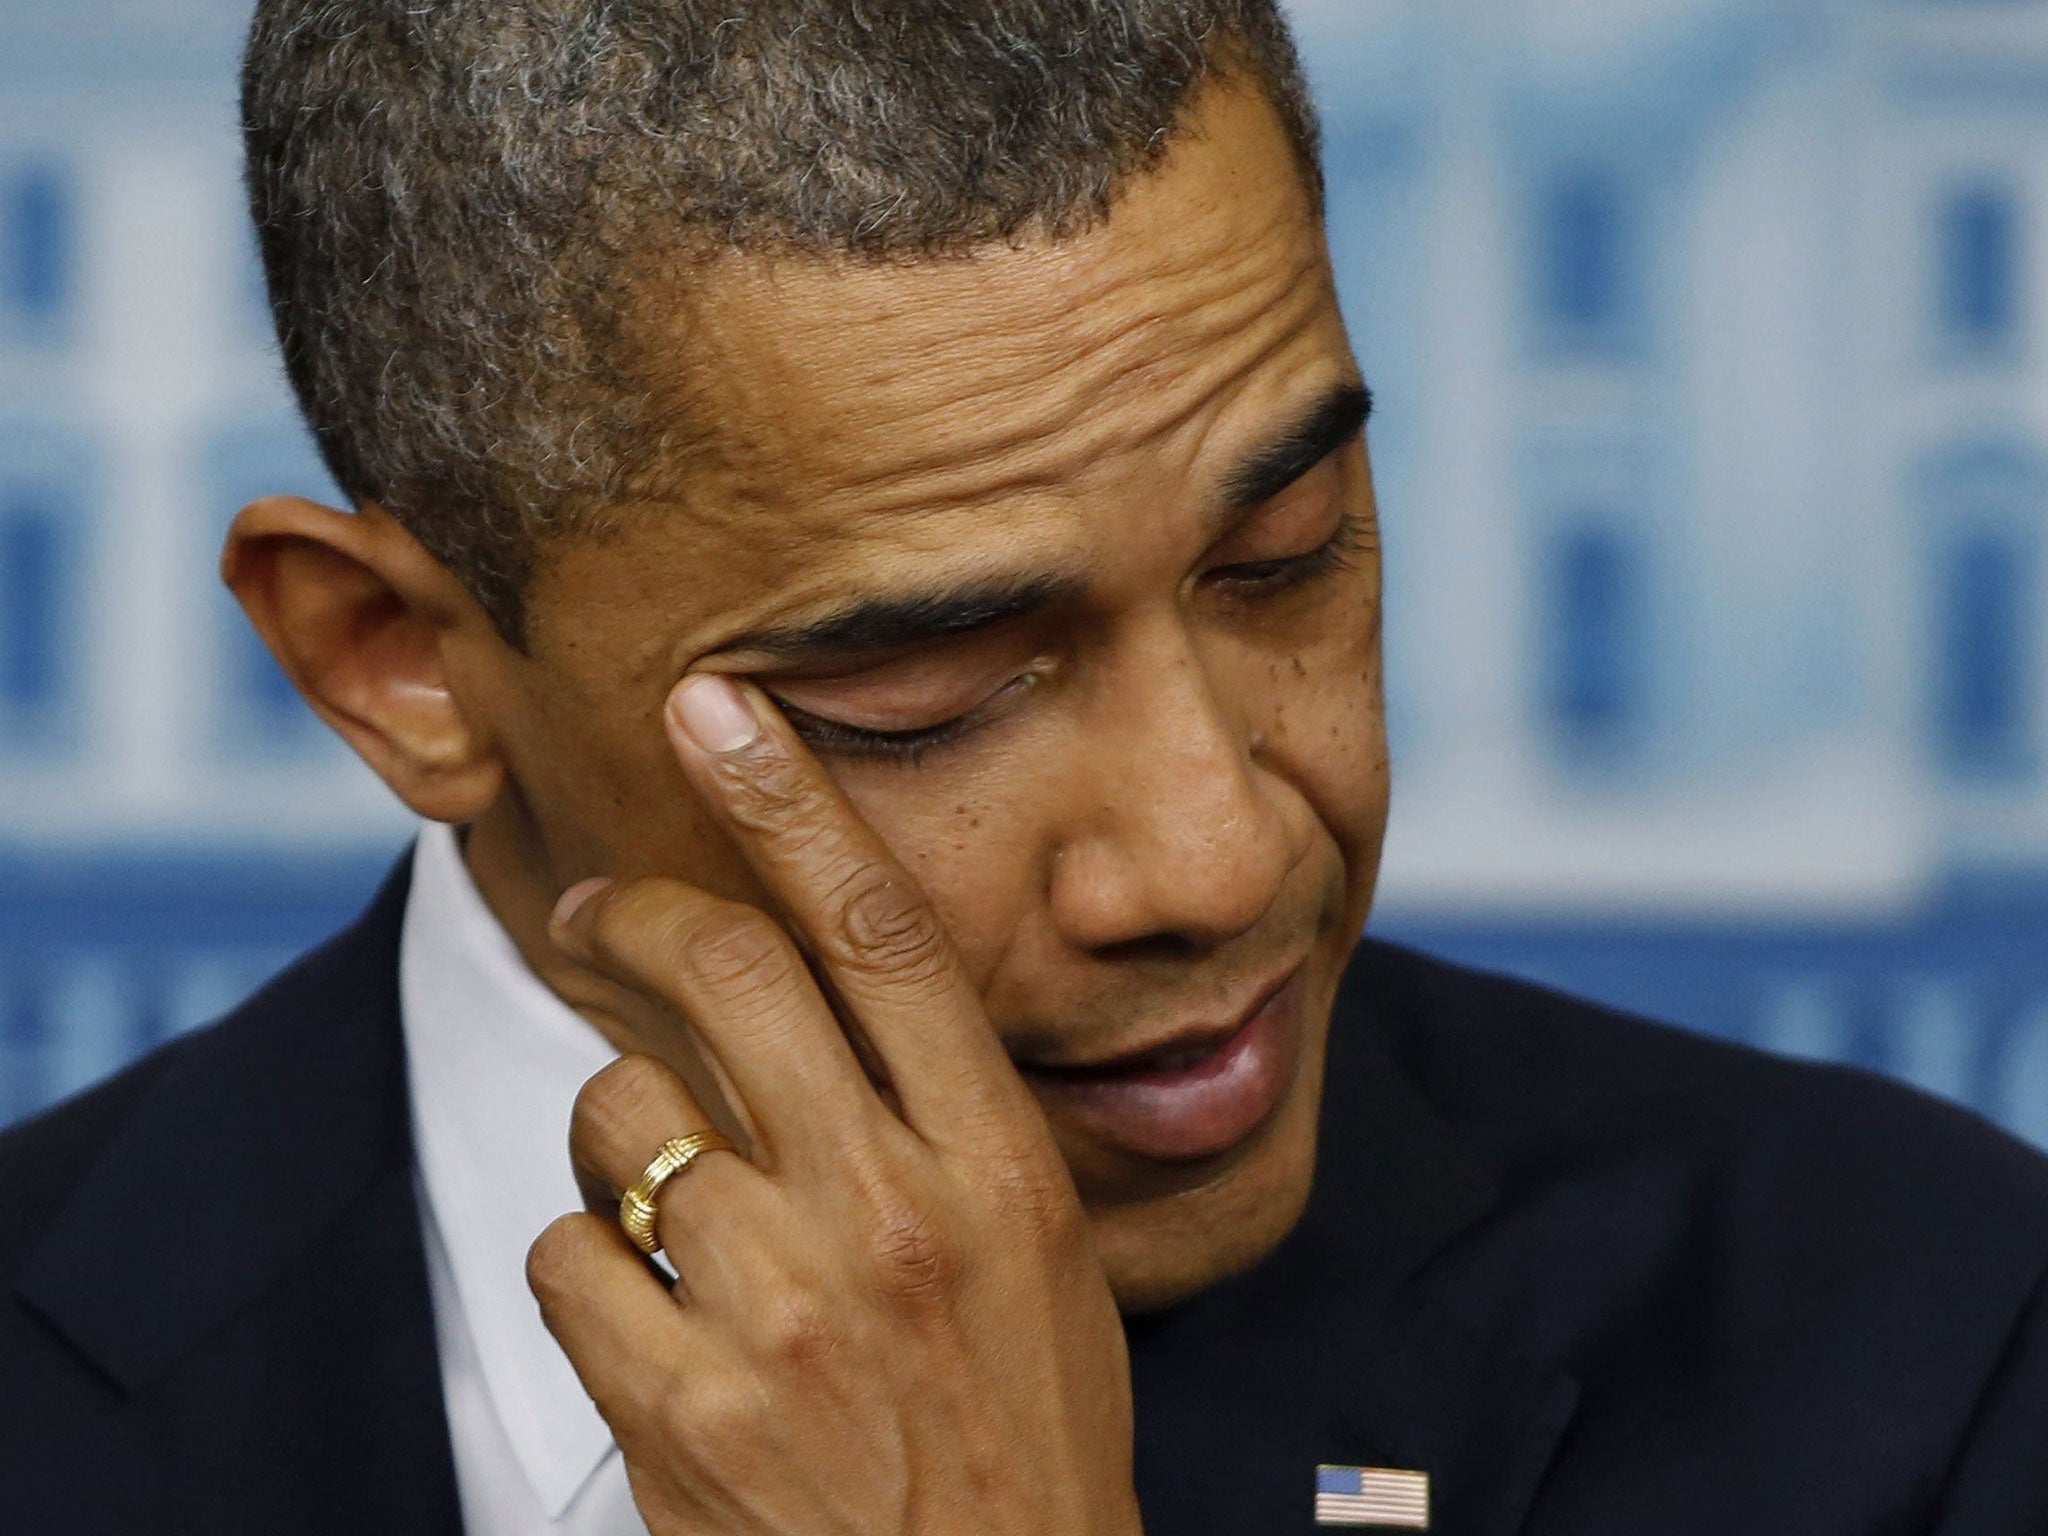 Shaken: President Obama wipes a tear as he speaks about the shootings in Newtown, Connecticut